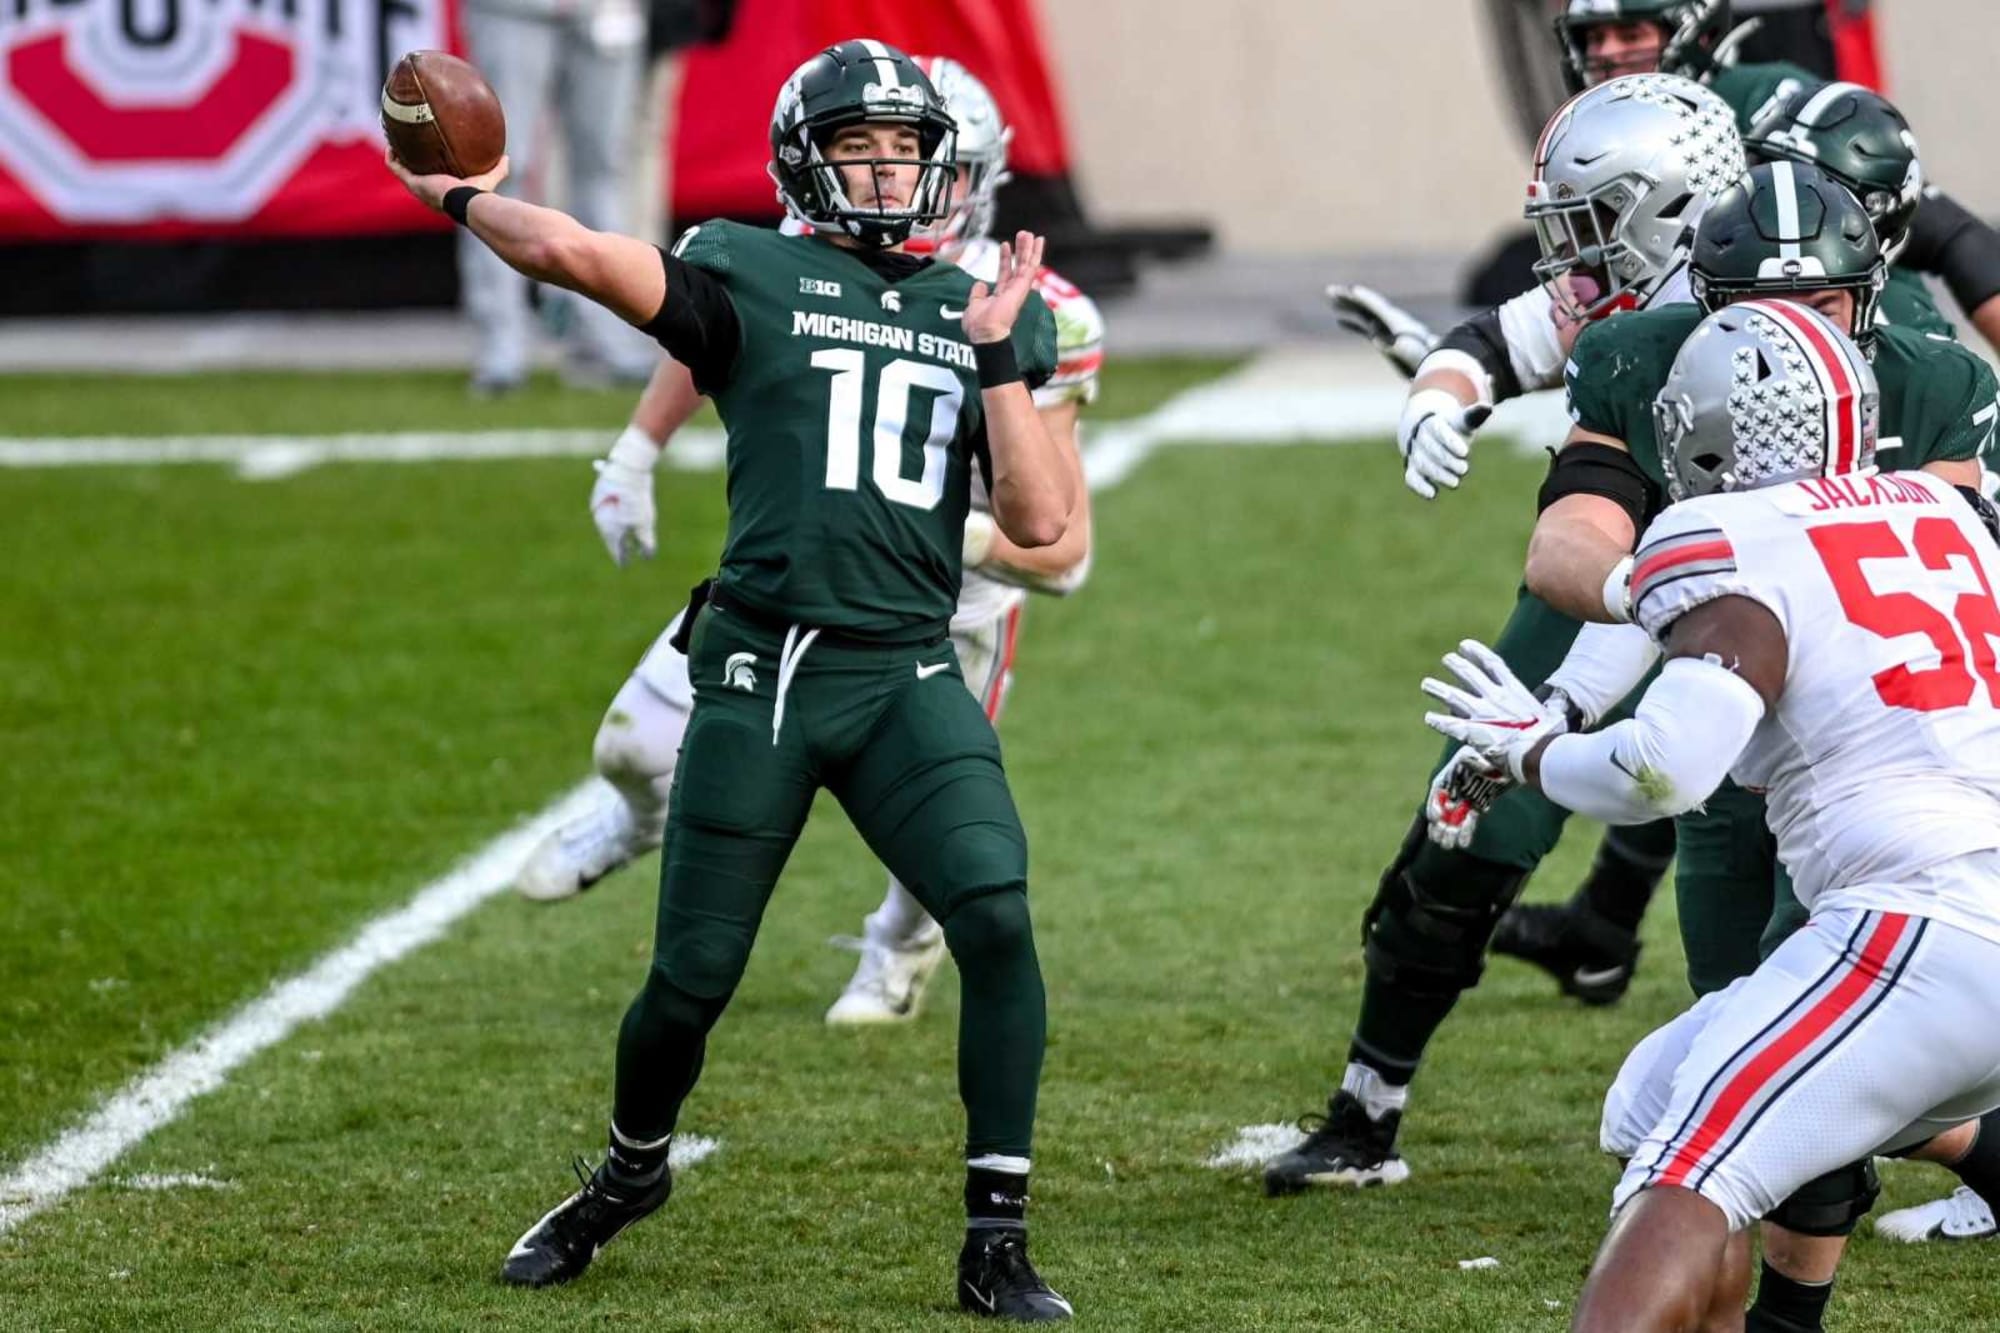 Michigan State Football S Quarterback Room Set Up Nicely For Long Term